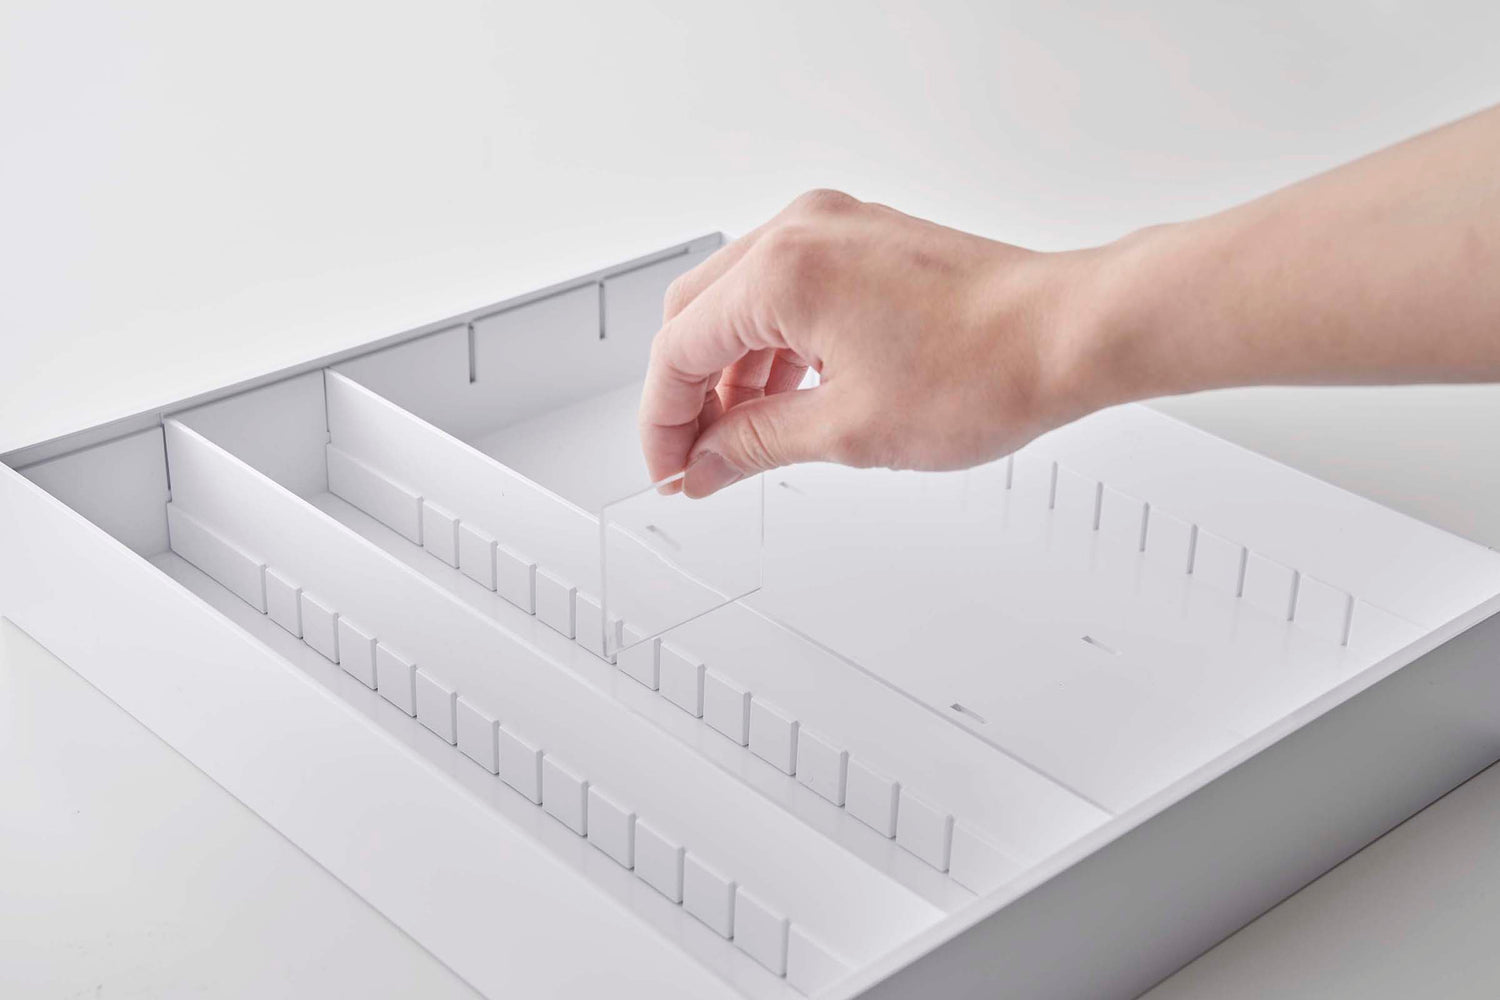 View 19 - Person inserting dividers in white Expandable Cutlery Storage Organizer on white background by Yamazaki Home.